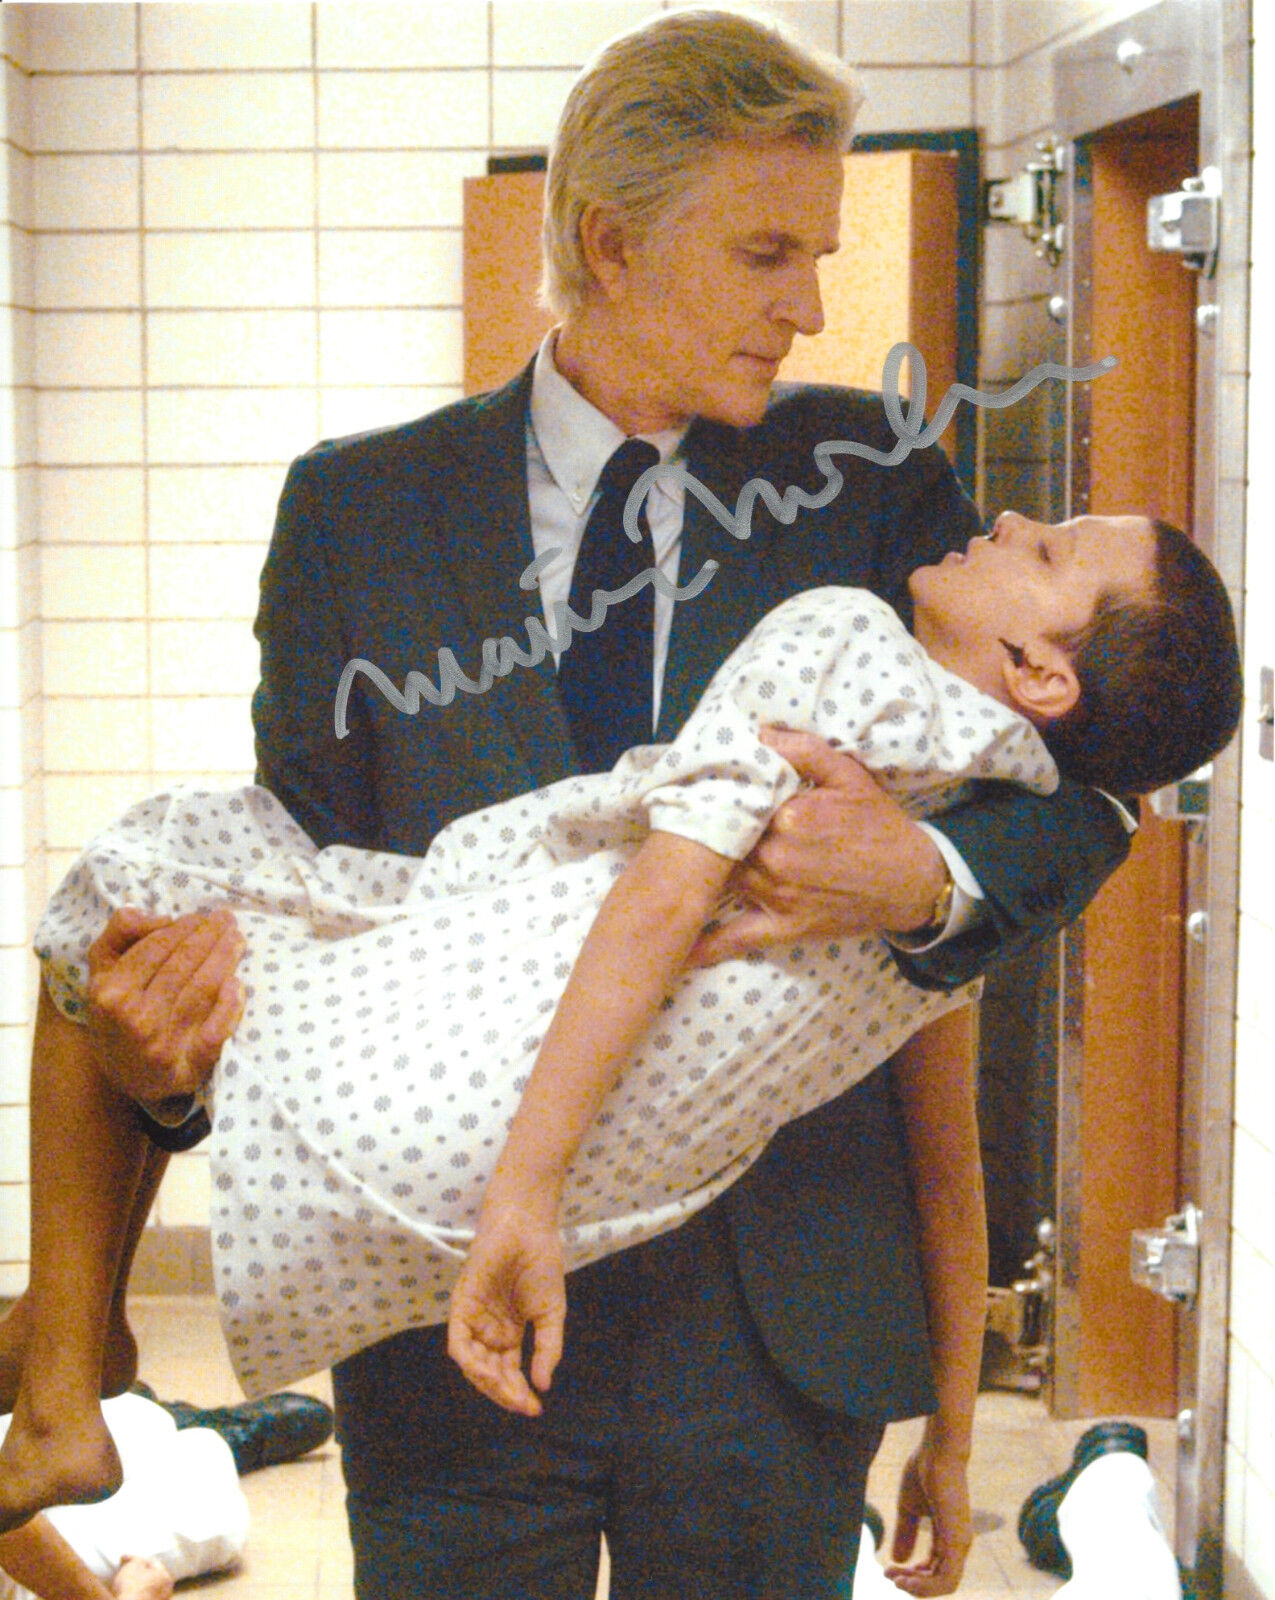 MATTHEW MODINE AUTHENTIC 'STRANGER THINGS' DR BRENNER 8X10 Photo Poster painting D w/COA ACTOR